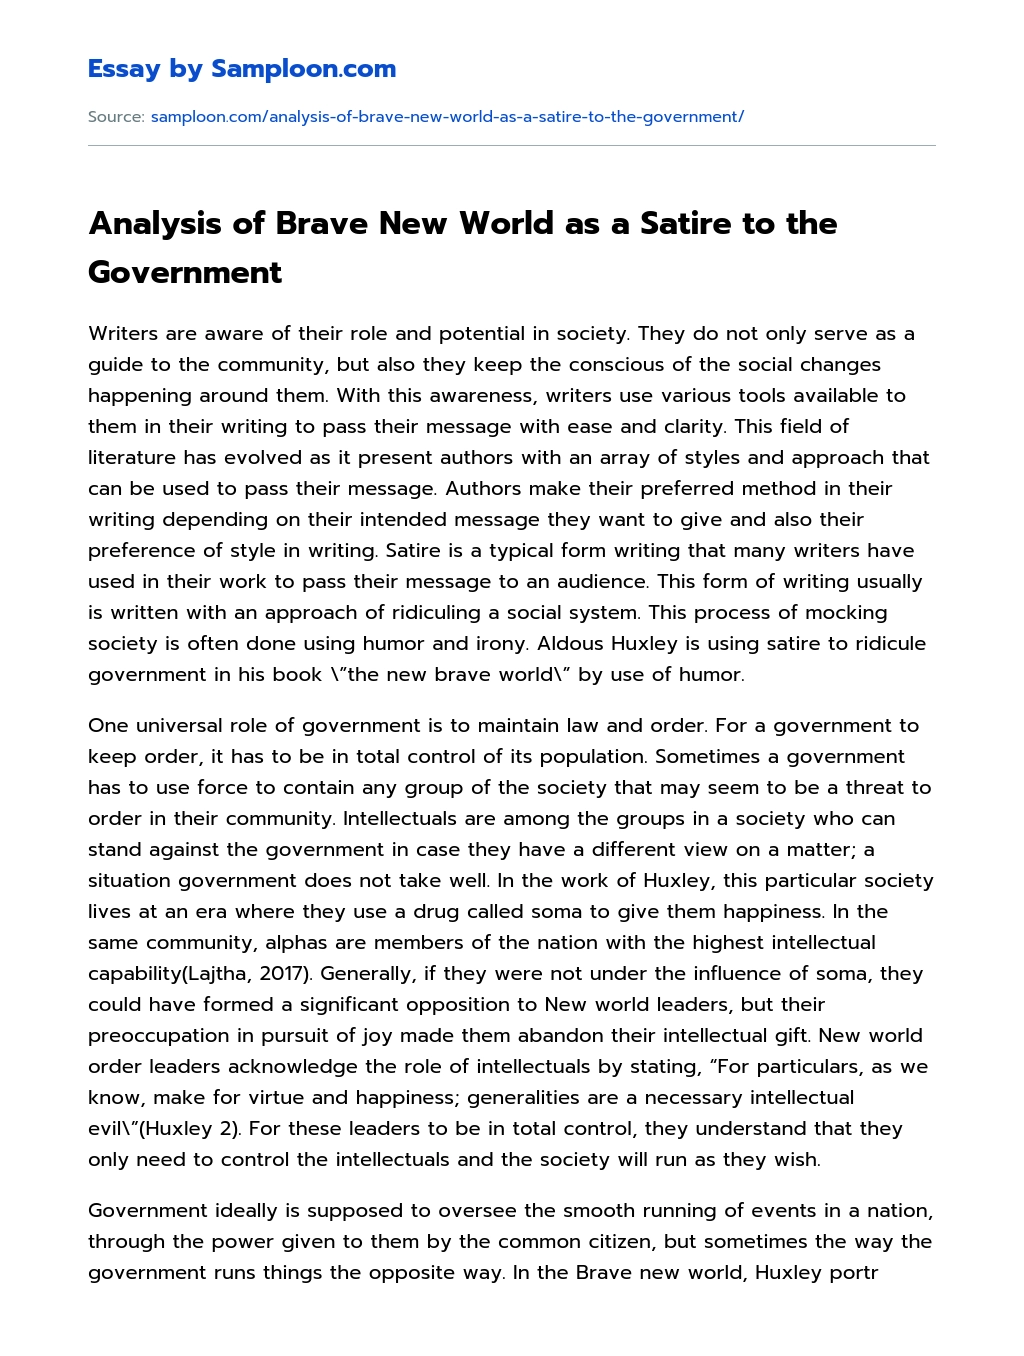 Analysis of Brave New World as a Satire to the Government essay